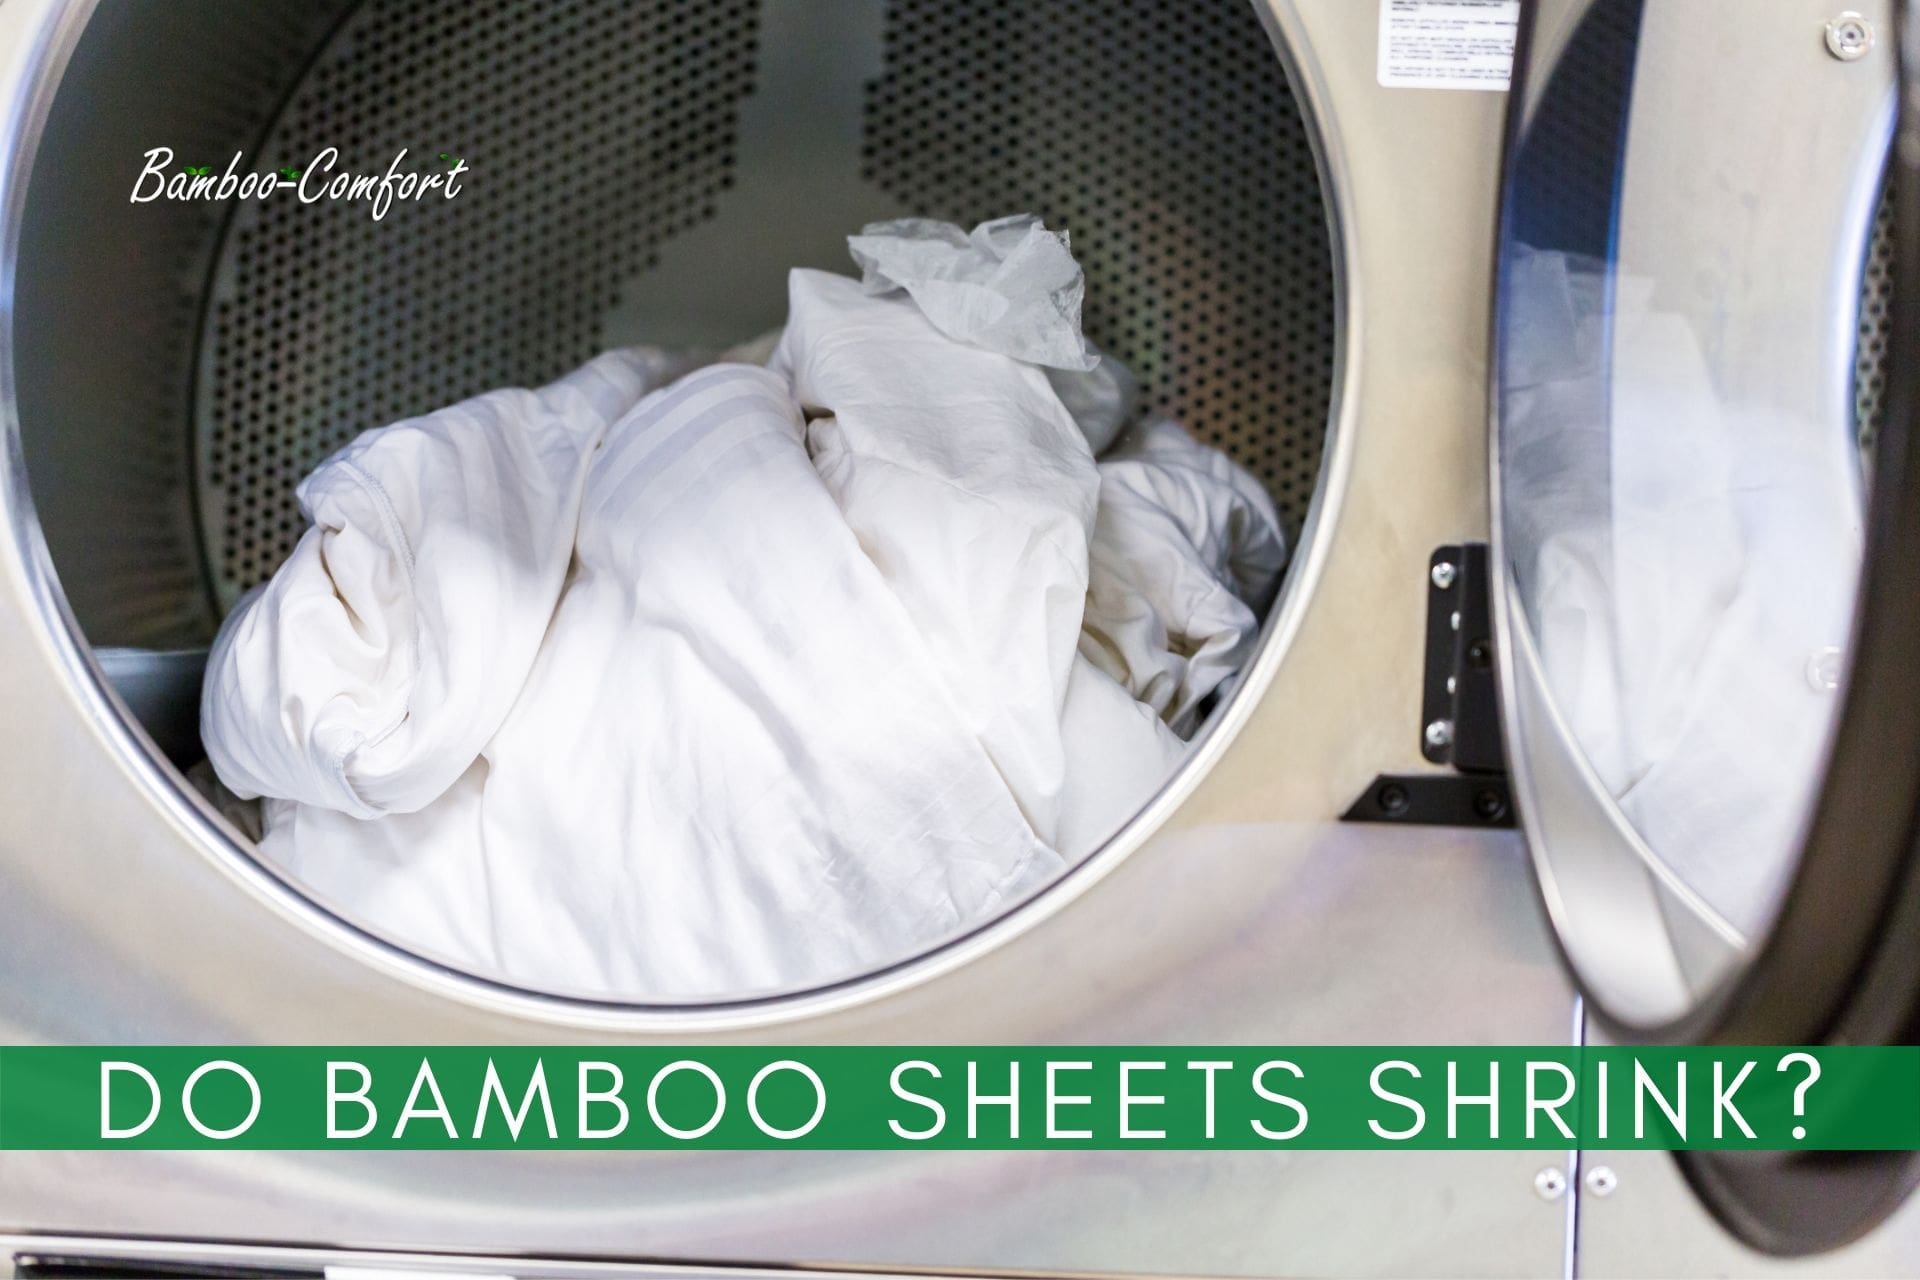 You are currently viewing Do Bamboo Sheets Shrink? 6 tips to prevent sheets from shrinking.